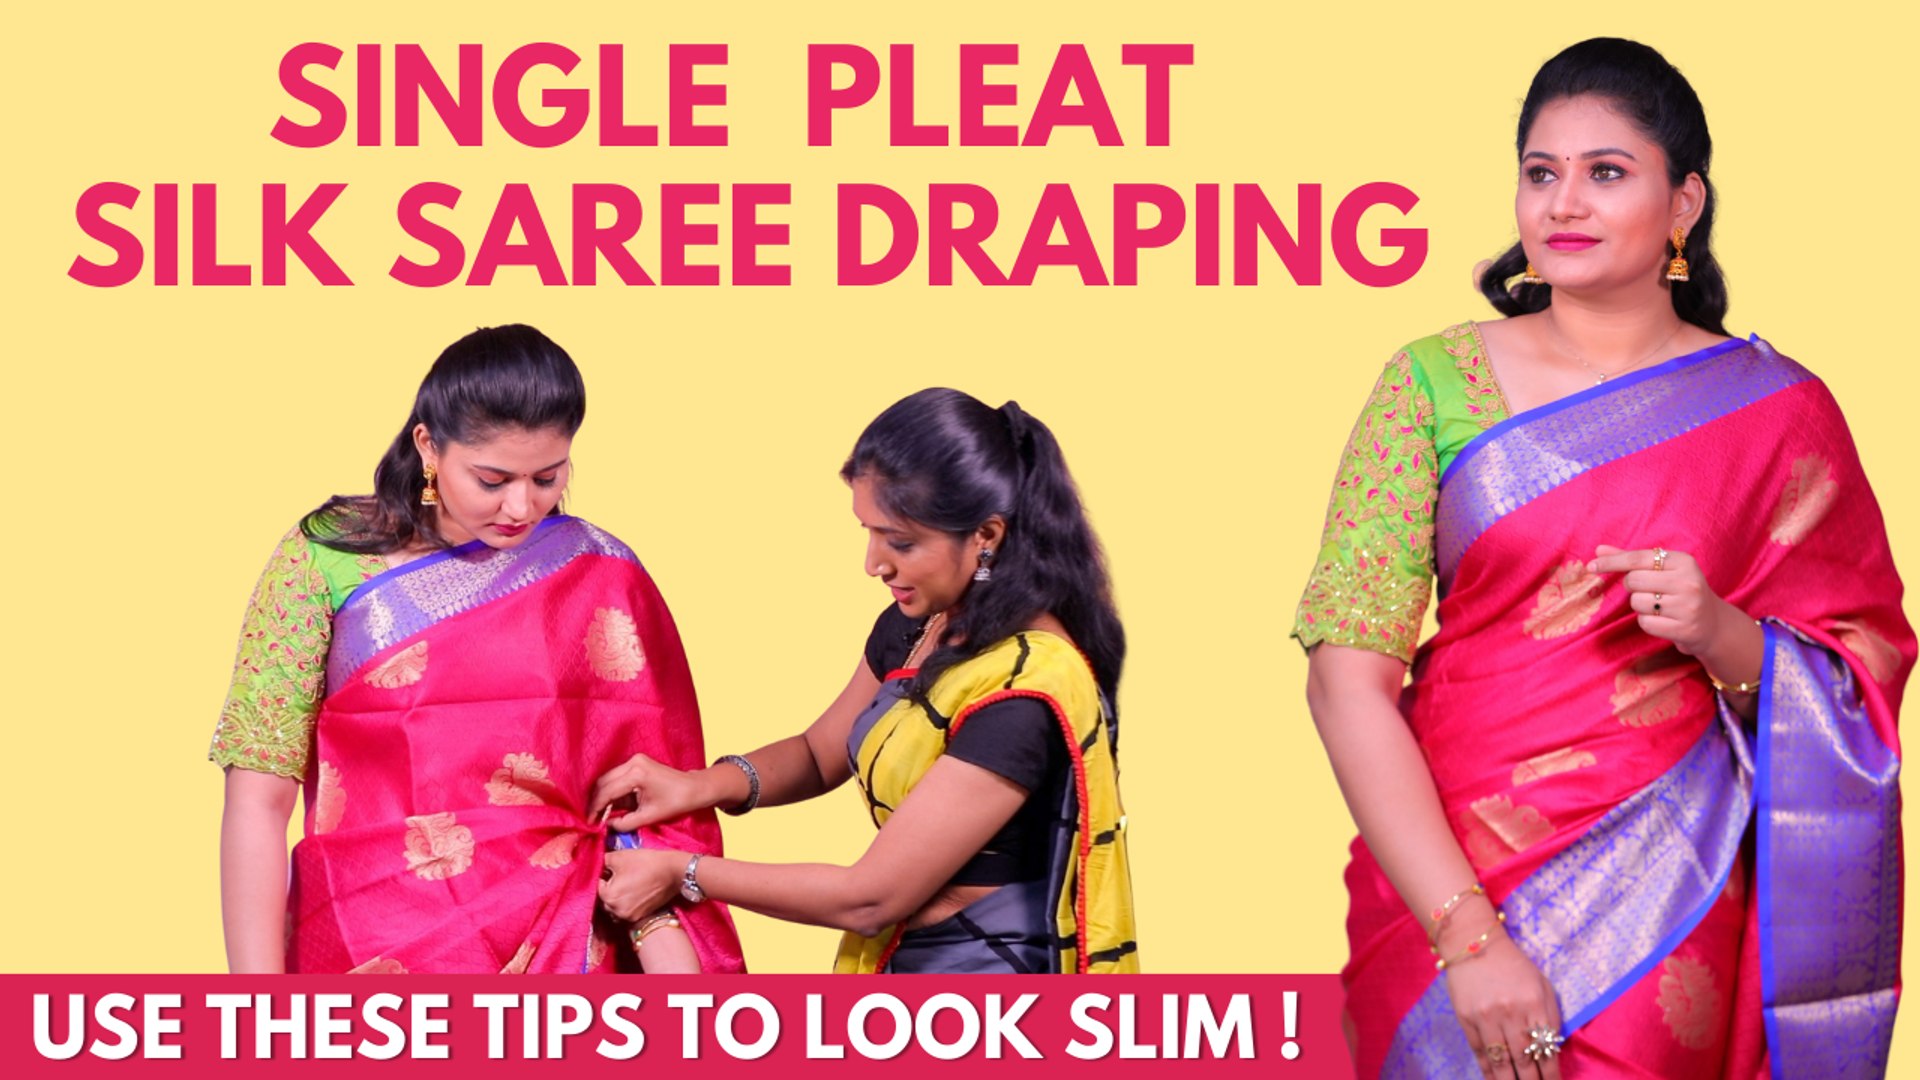 How To Drape Silk Saree in Single Pleat, Easy Tips & Tricks To Look Slim